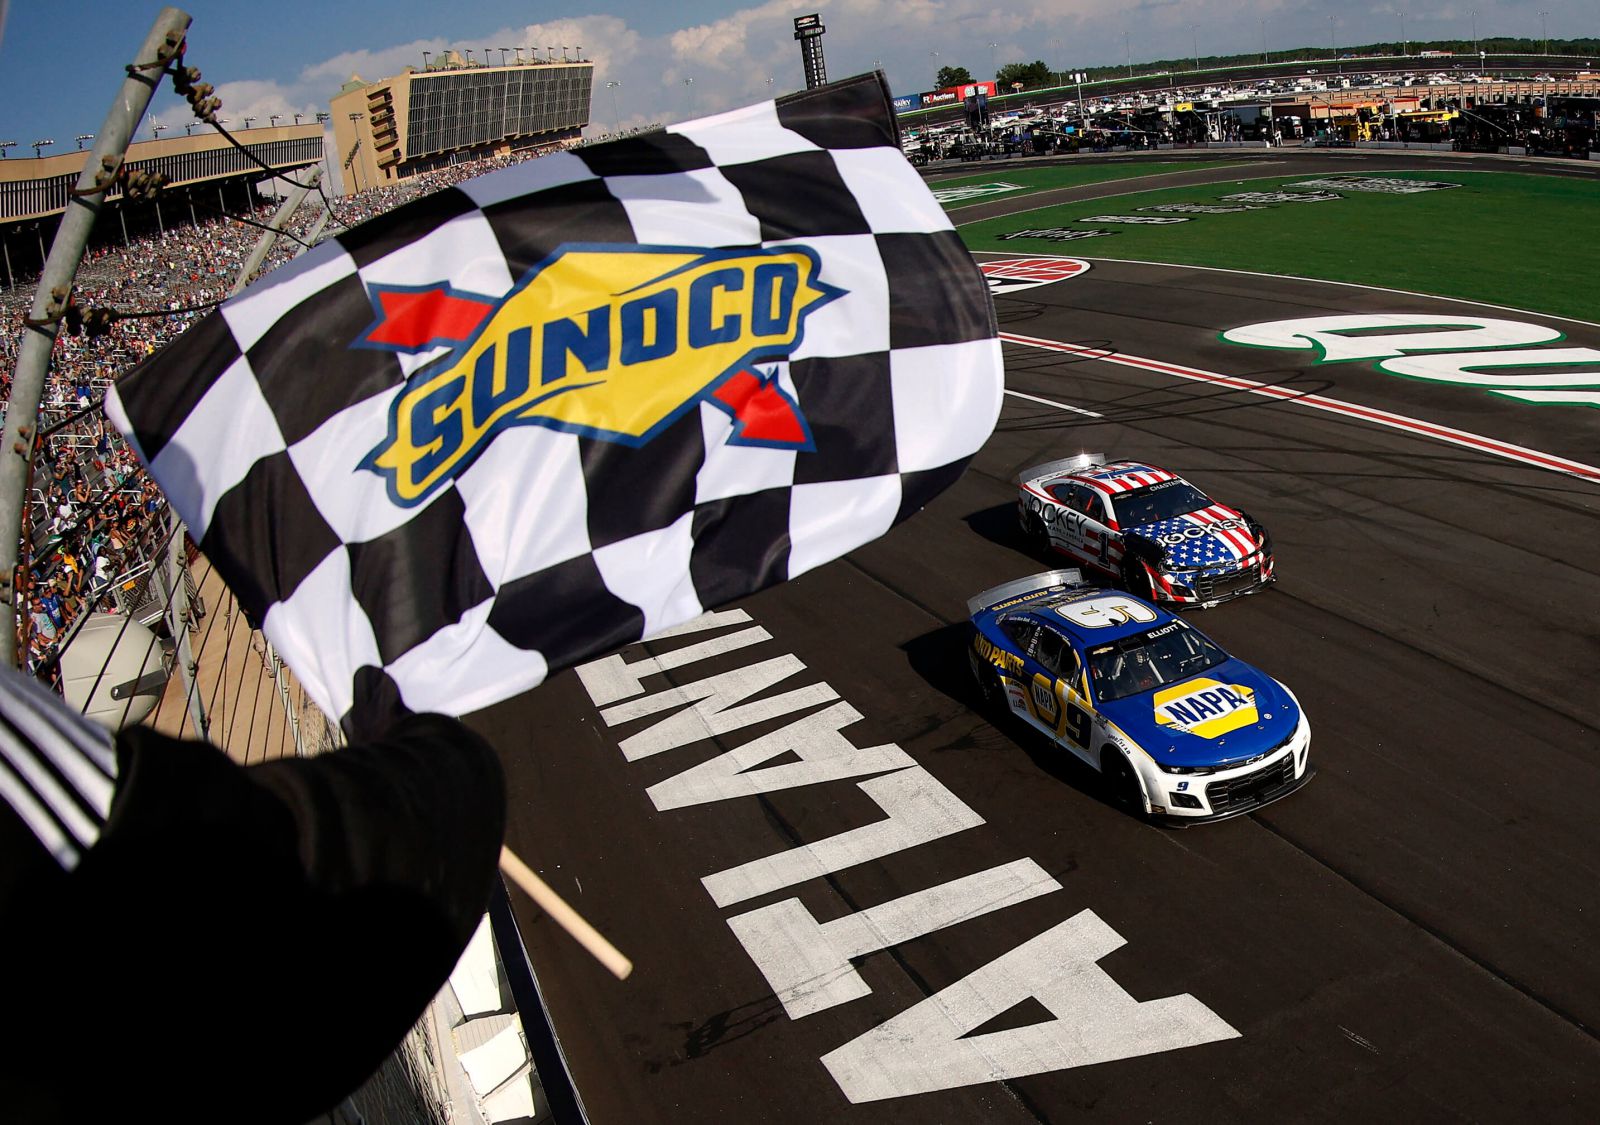 Race cars on track with Nascar official waving Sunoco flag